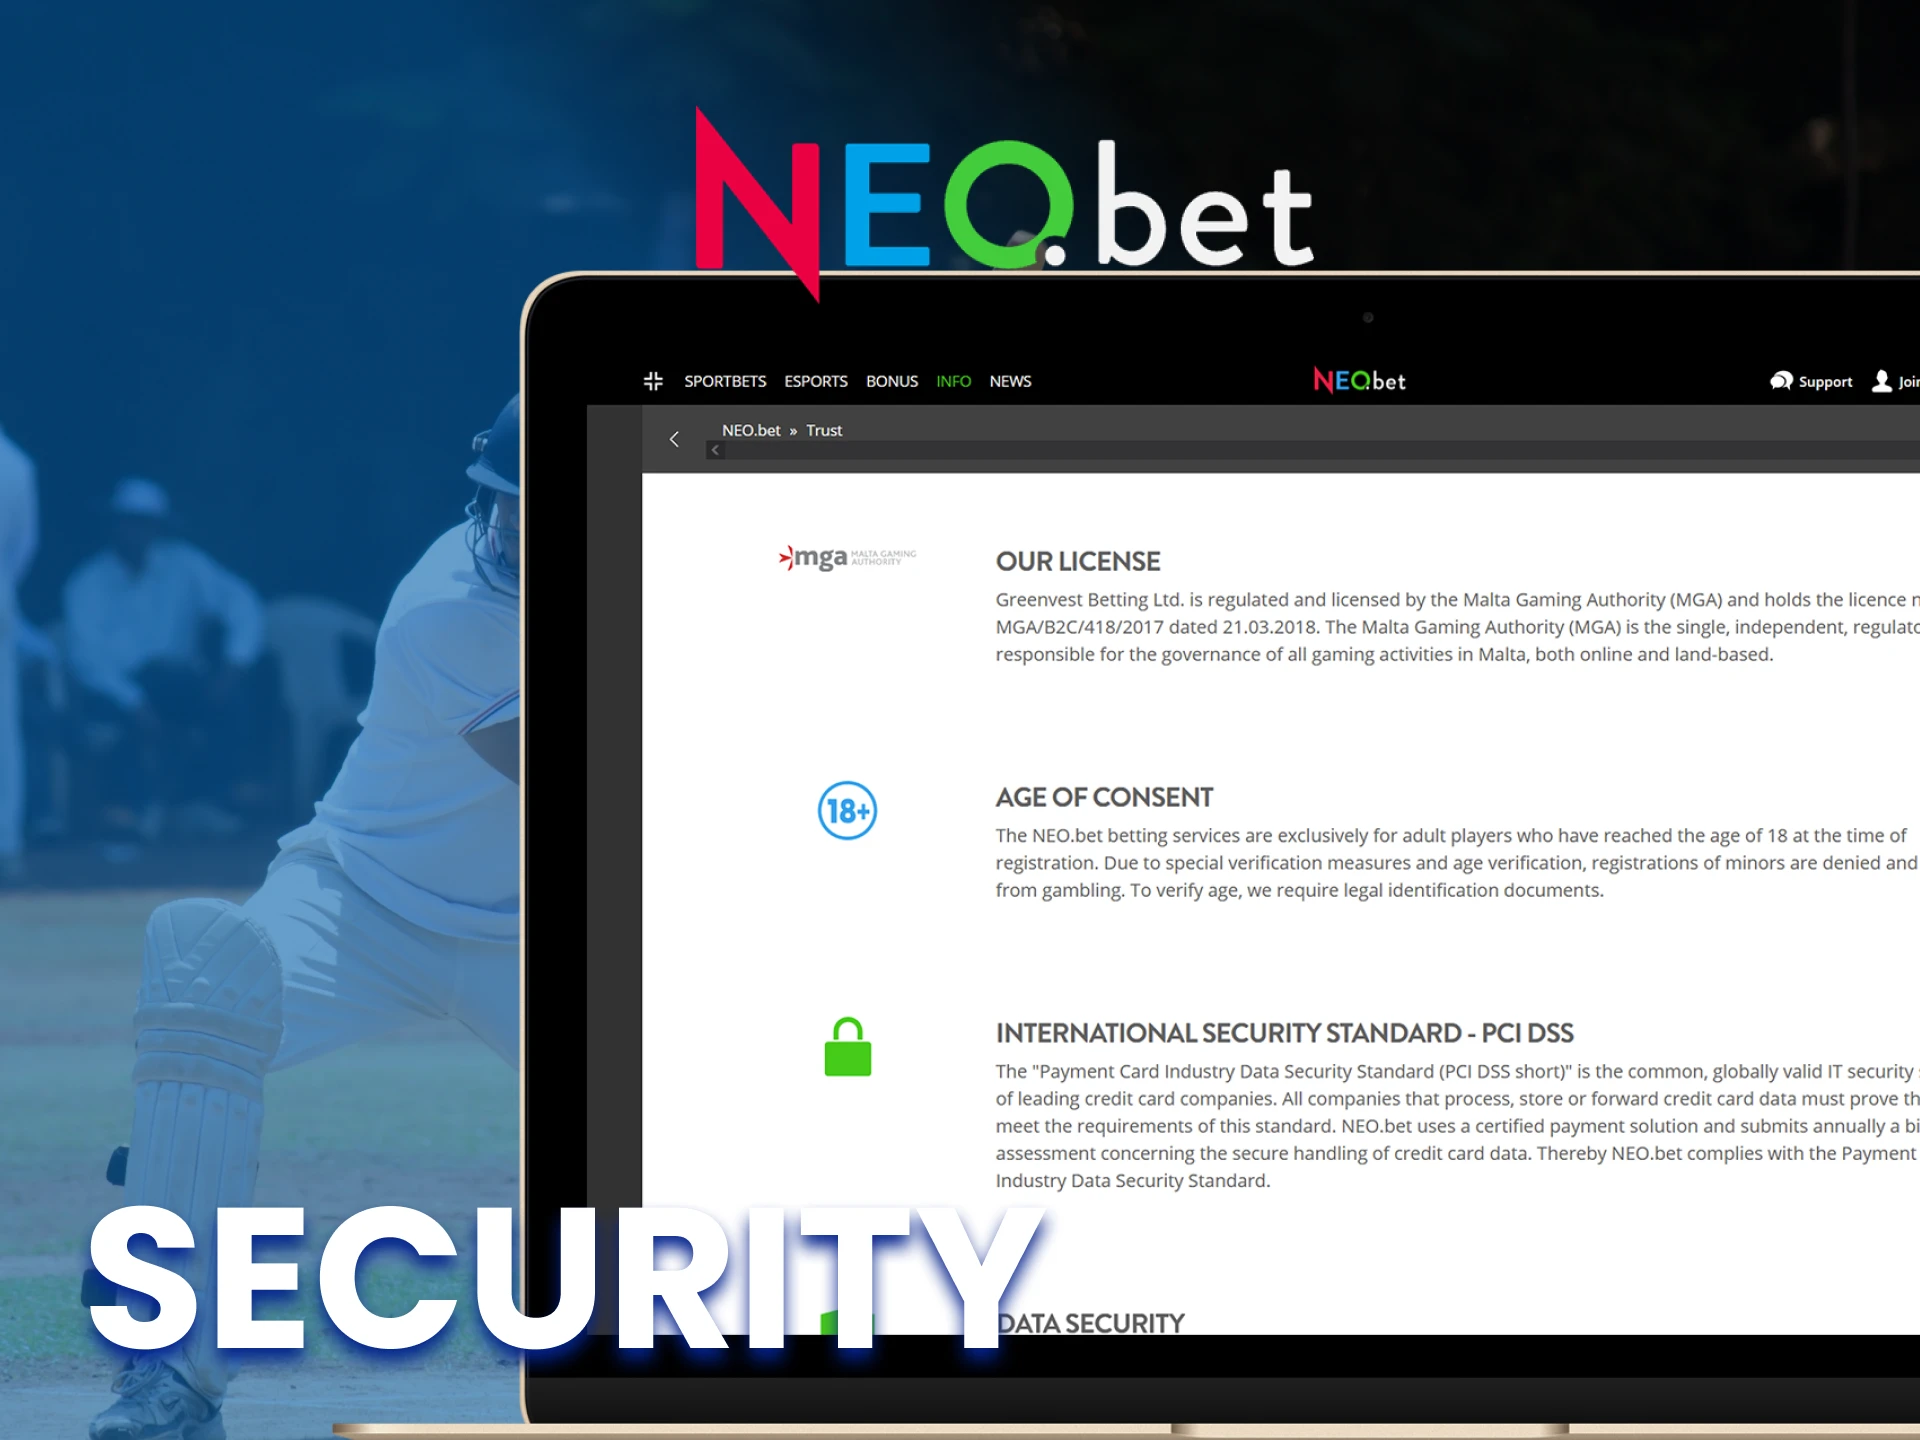 NEO.bet cares about the safety and security of users' data.